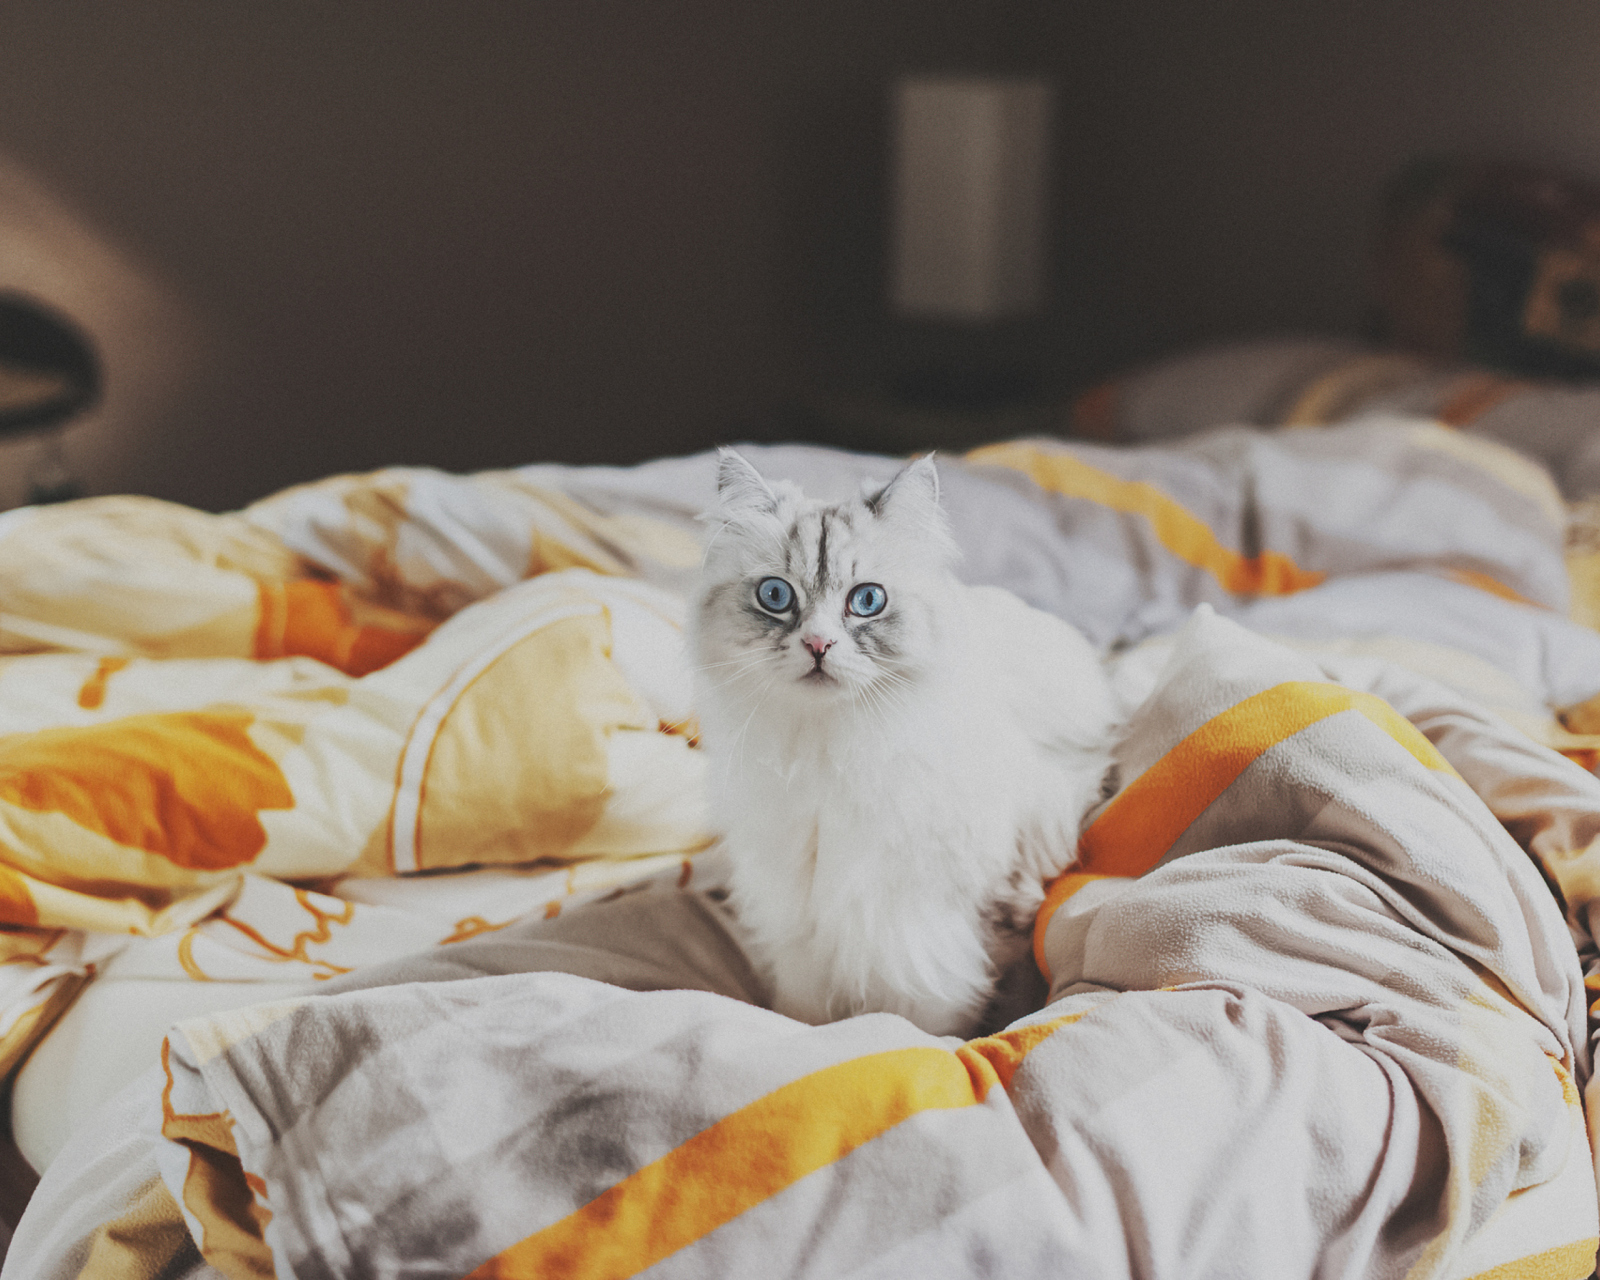 White Cat With Blue Eyes In Bed wallpaper 1600x1280